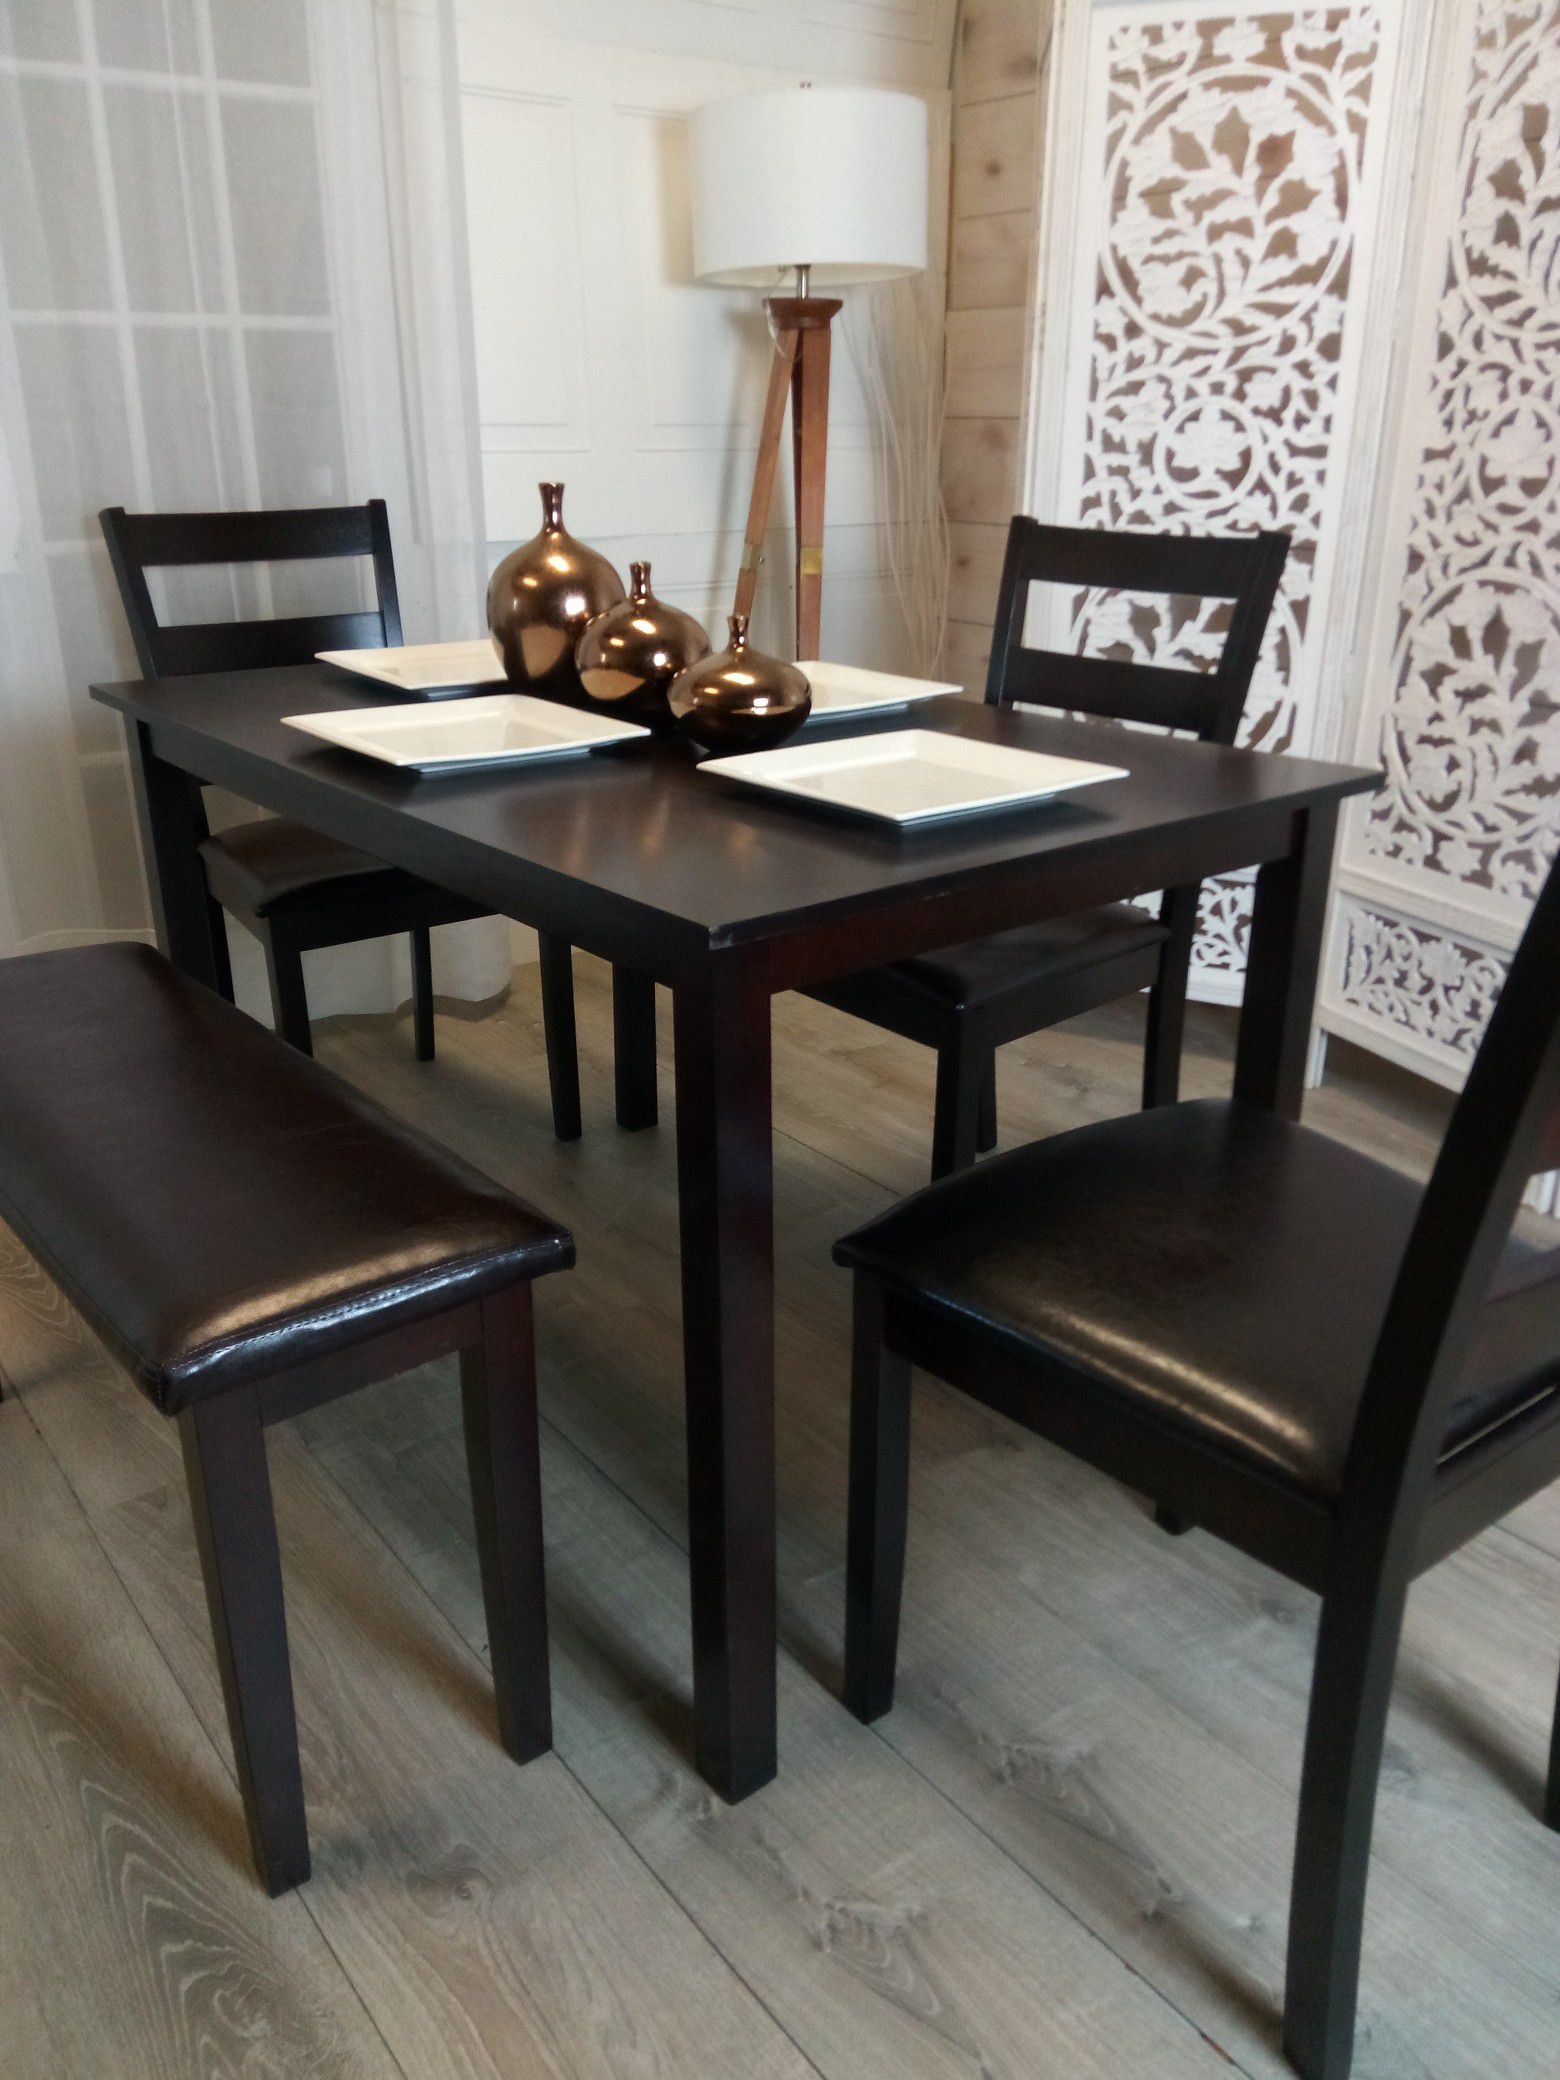 New Dining Room Tables Kitchen Table Chairs Bench Dinette